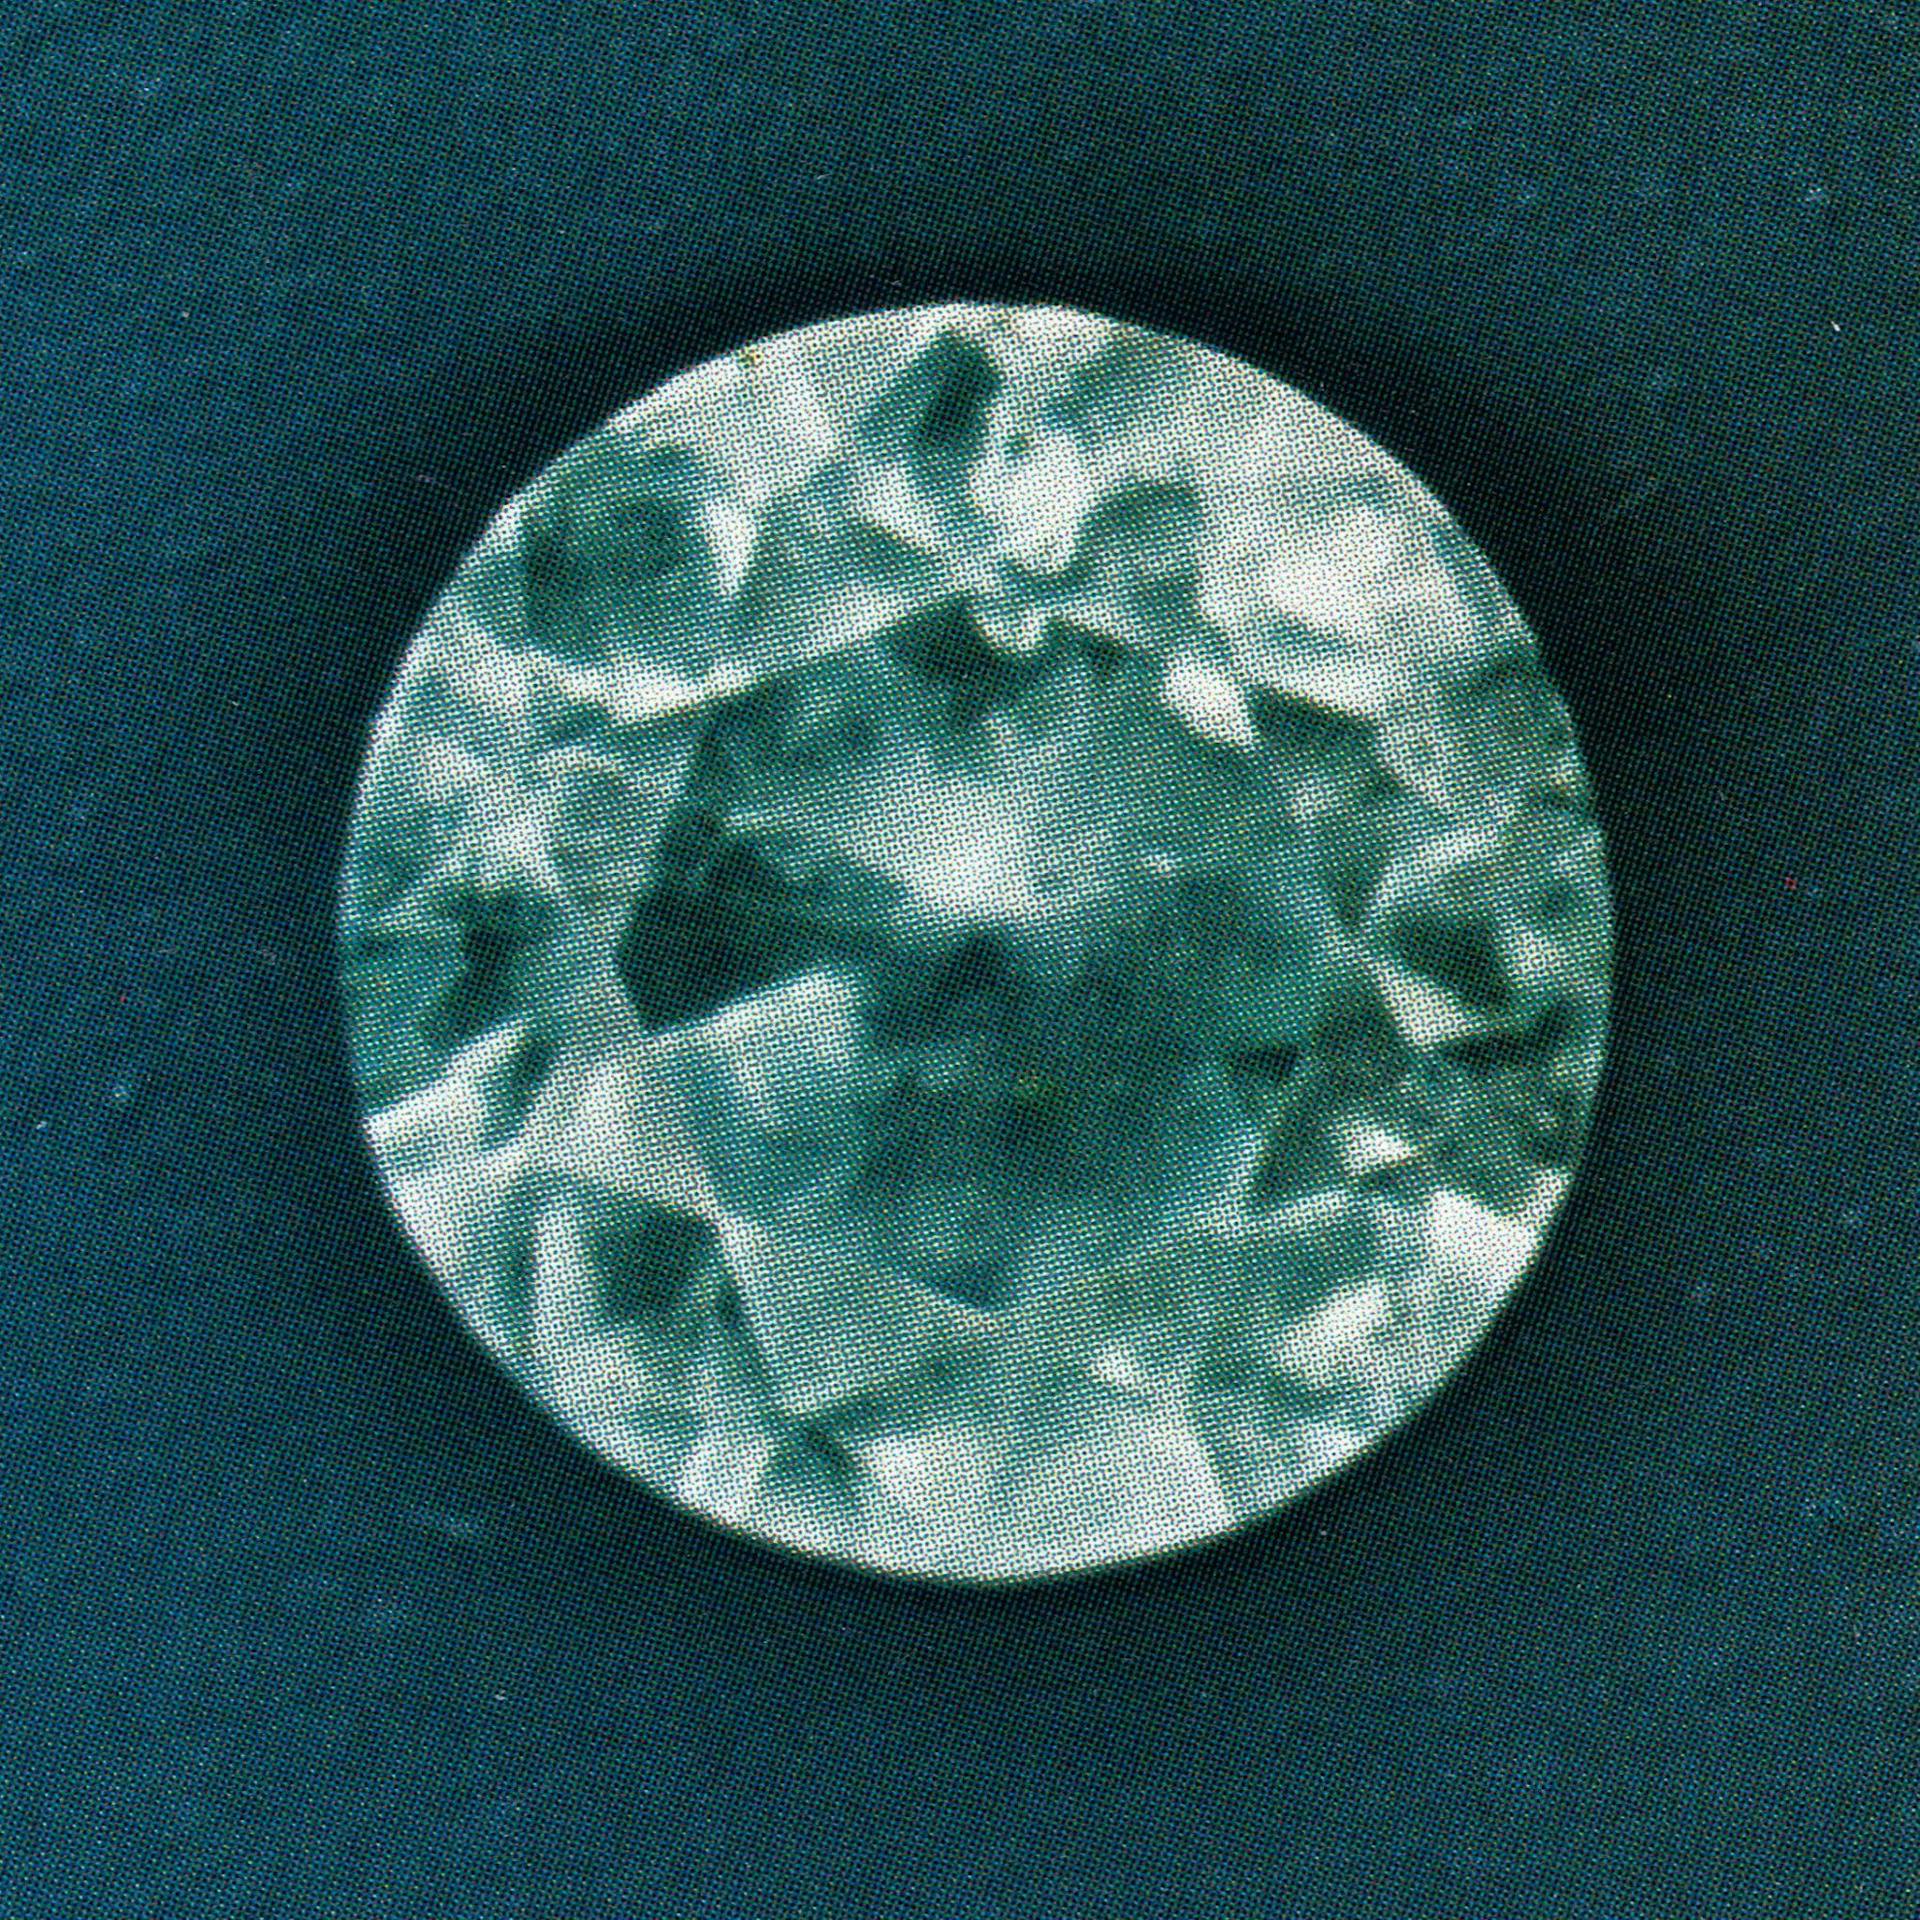 faceted boracite - Germany